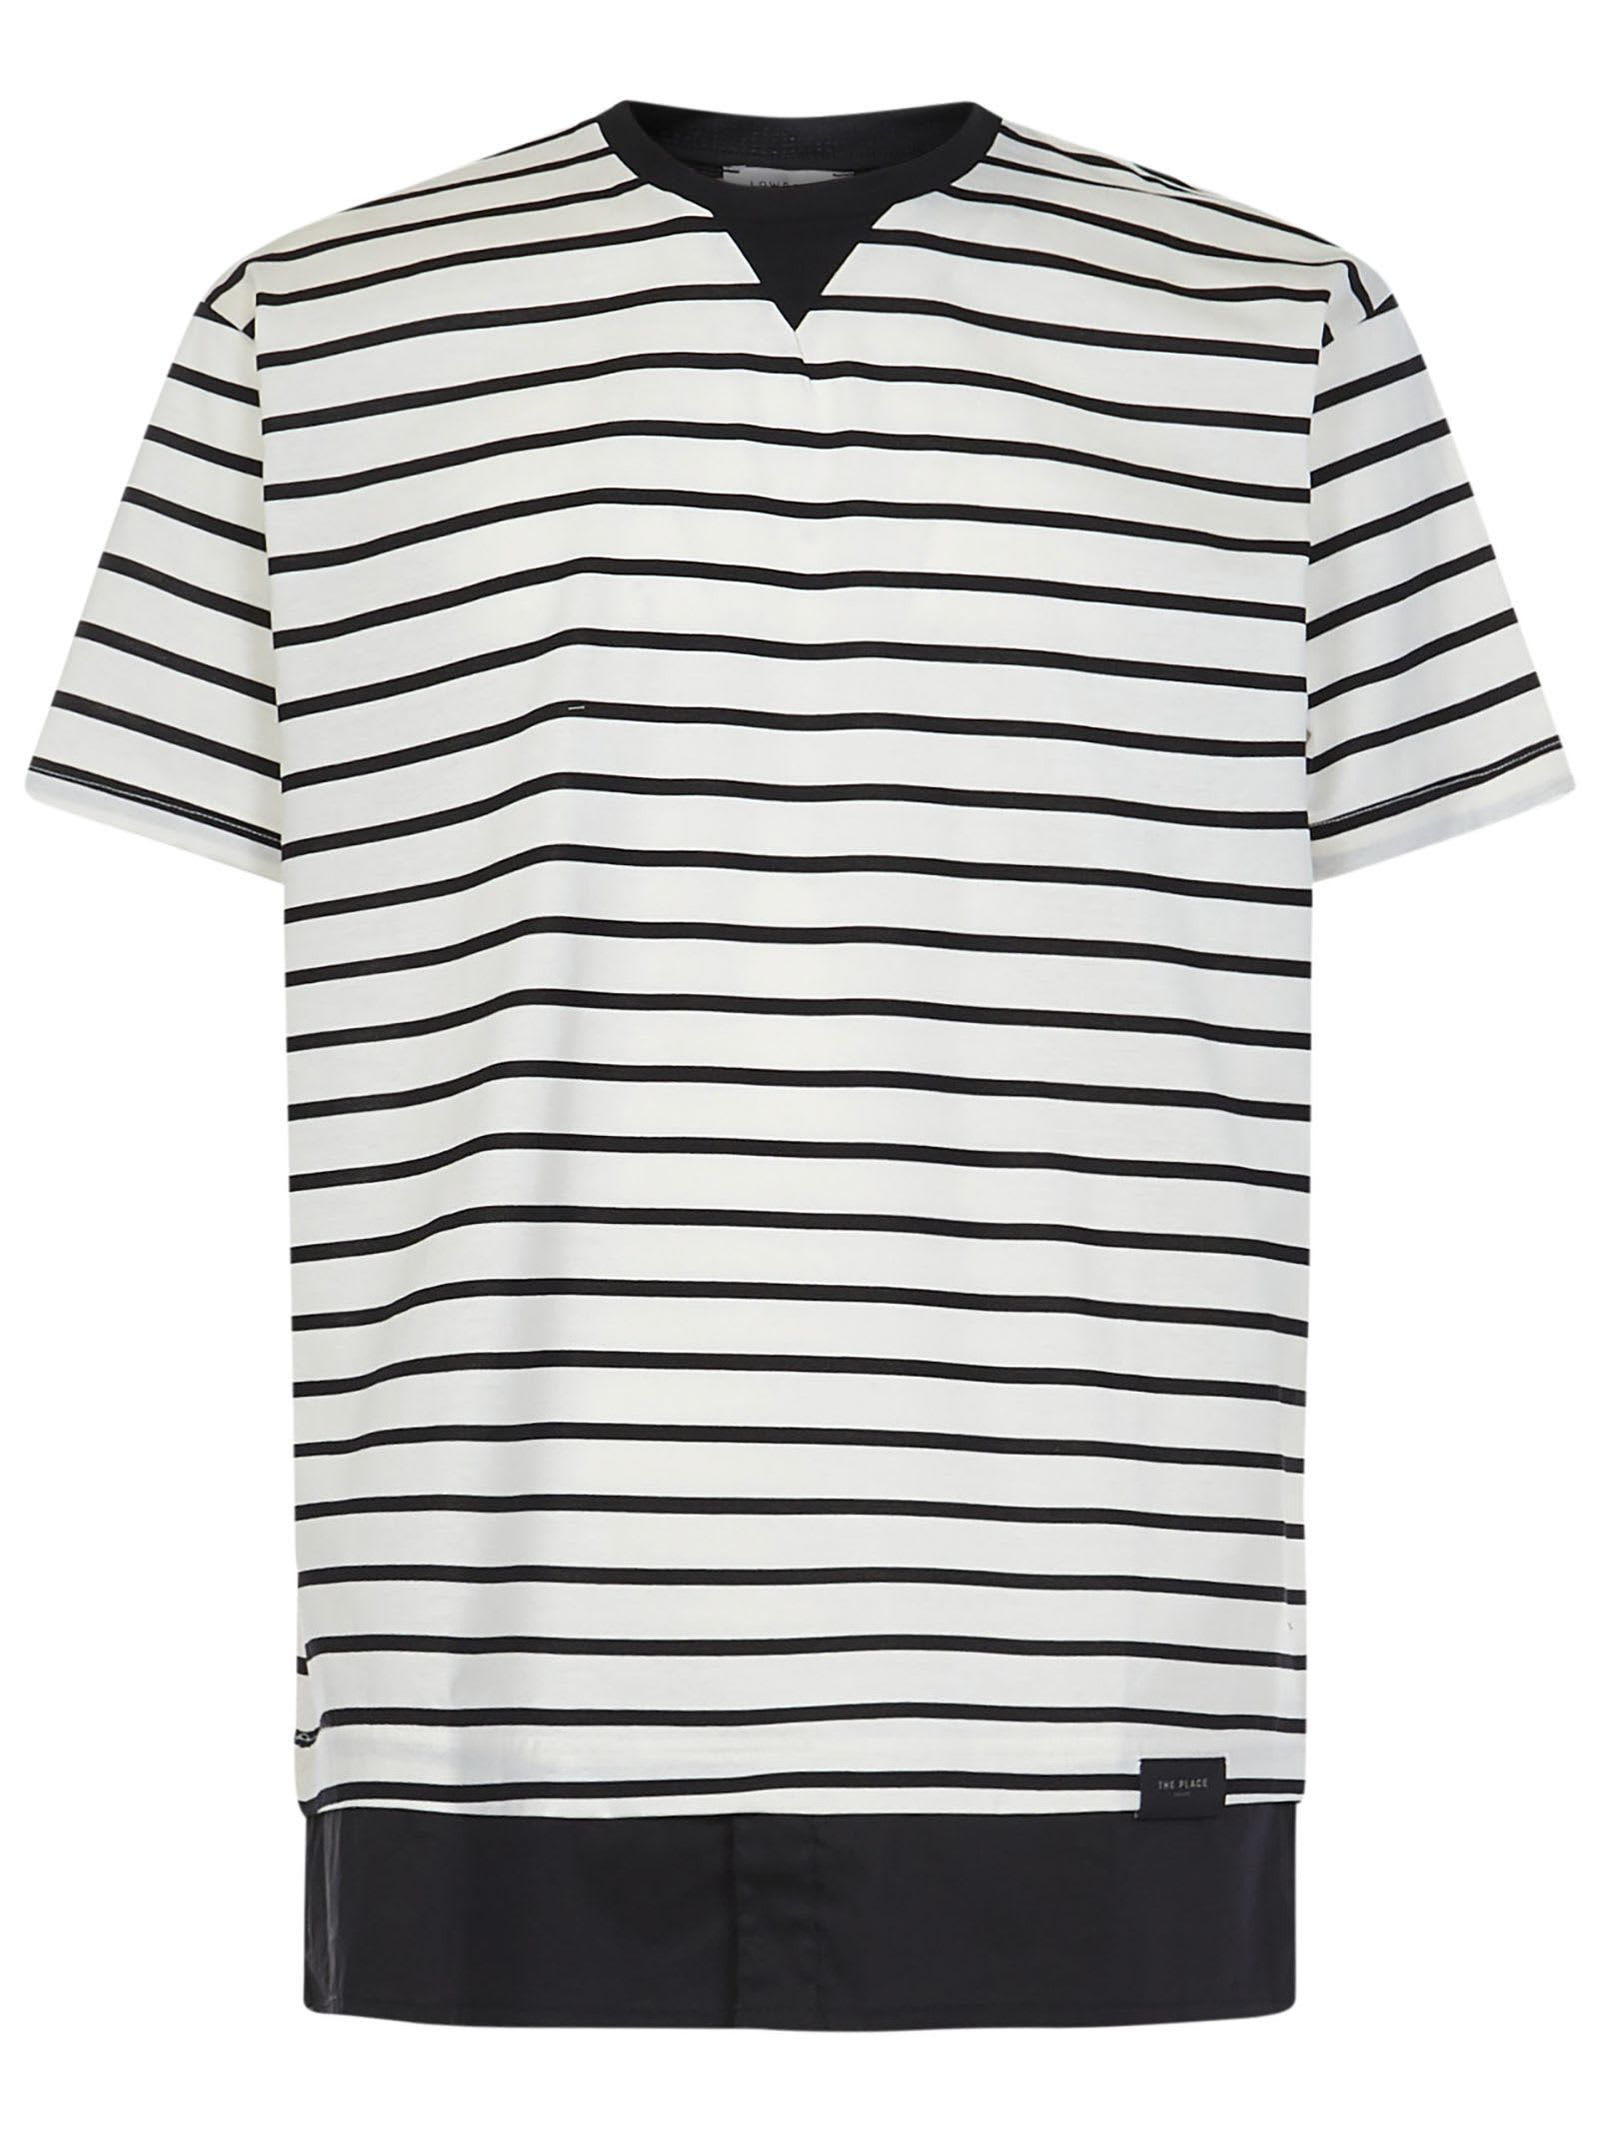 Low Brand Black And White Cotton Striped T-shirt